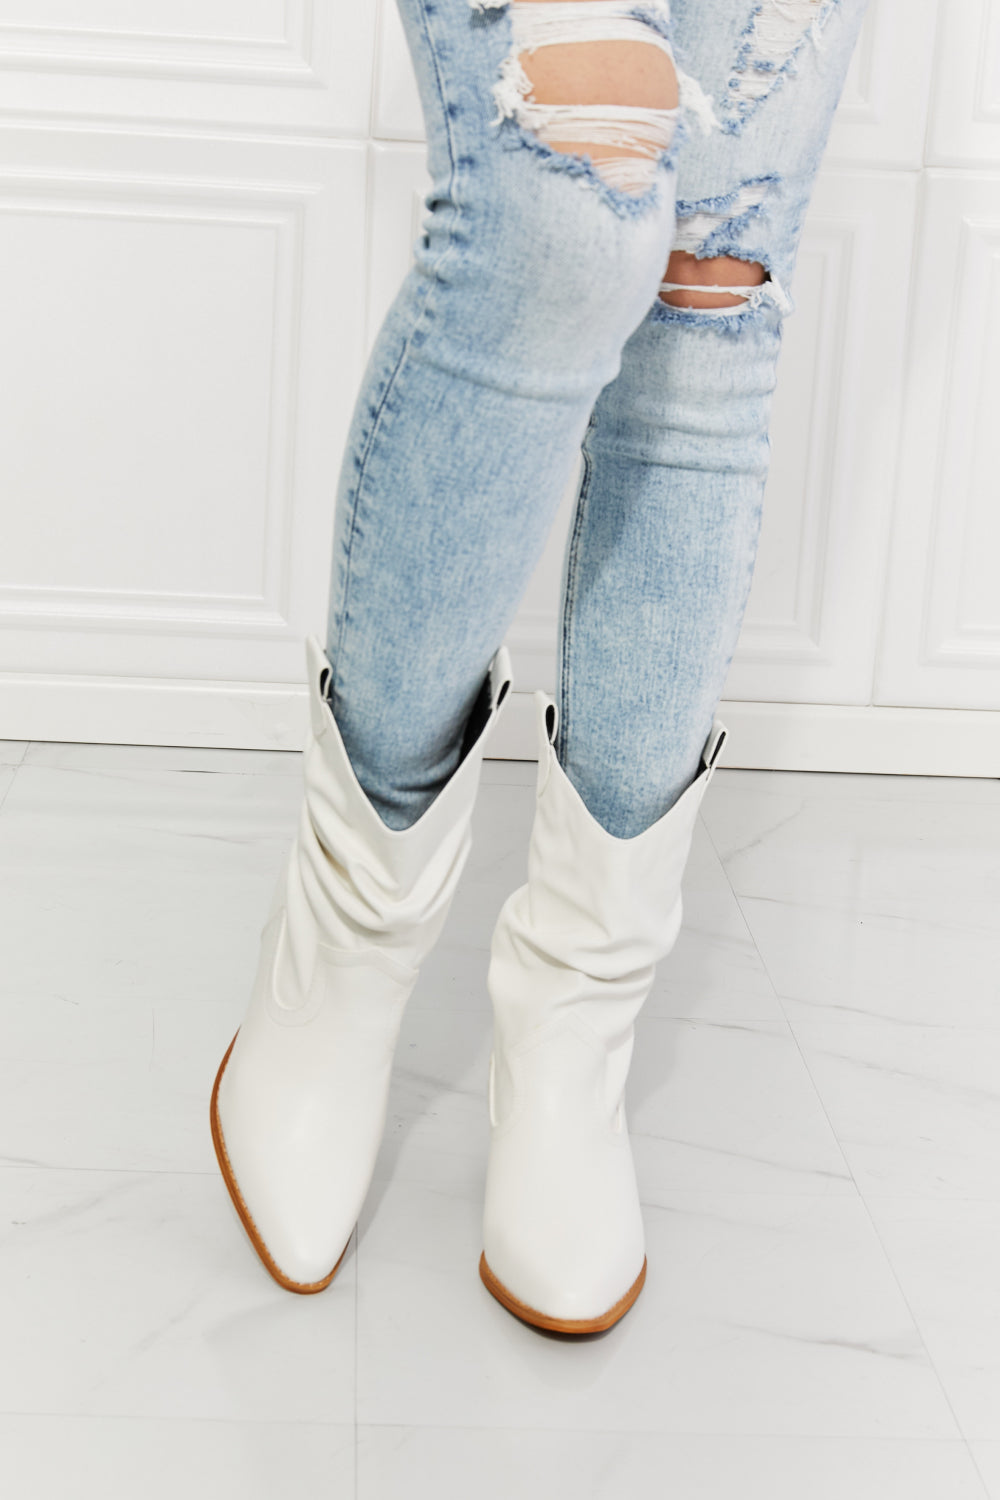 MMShoes Better in Texas Scrunch Cowboy Boots in White ONLINE EXCLUSIVE